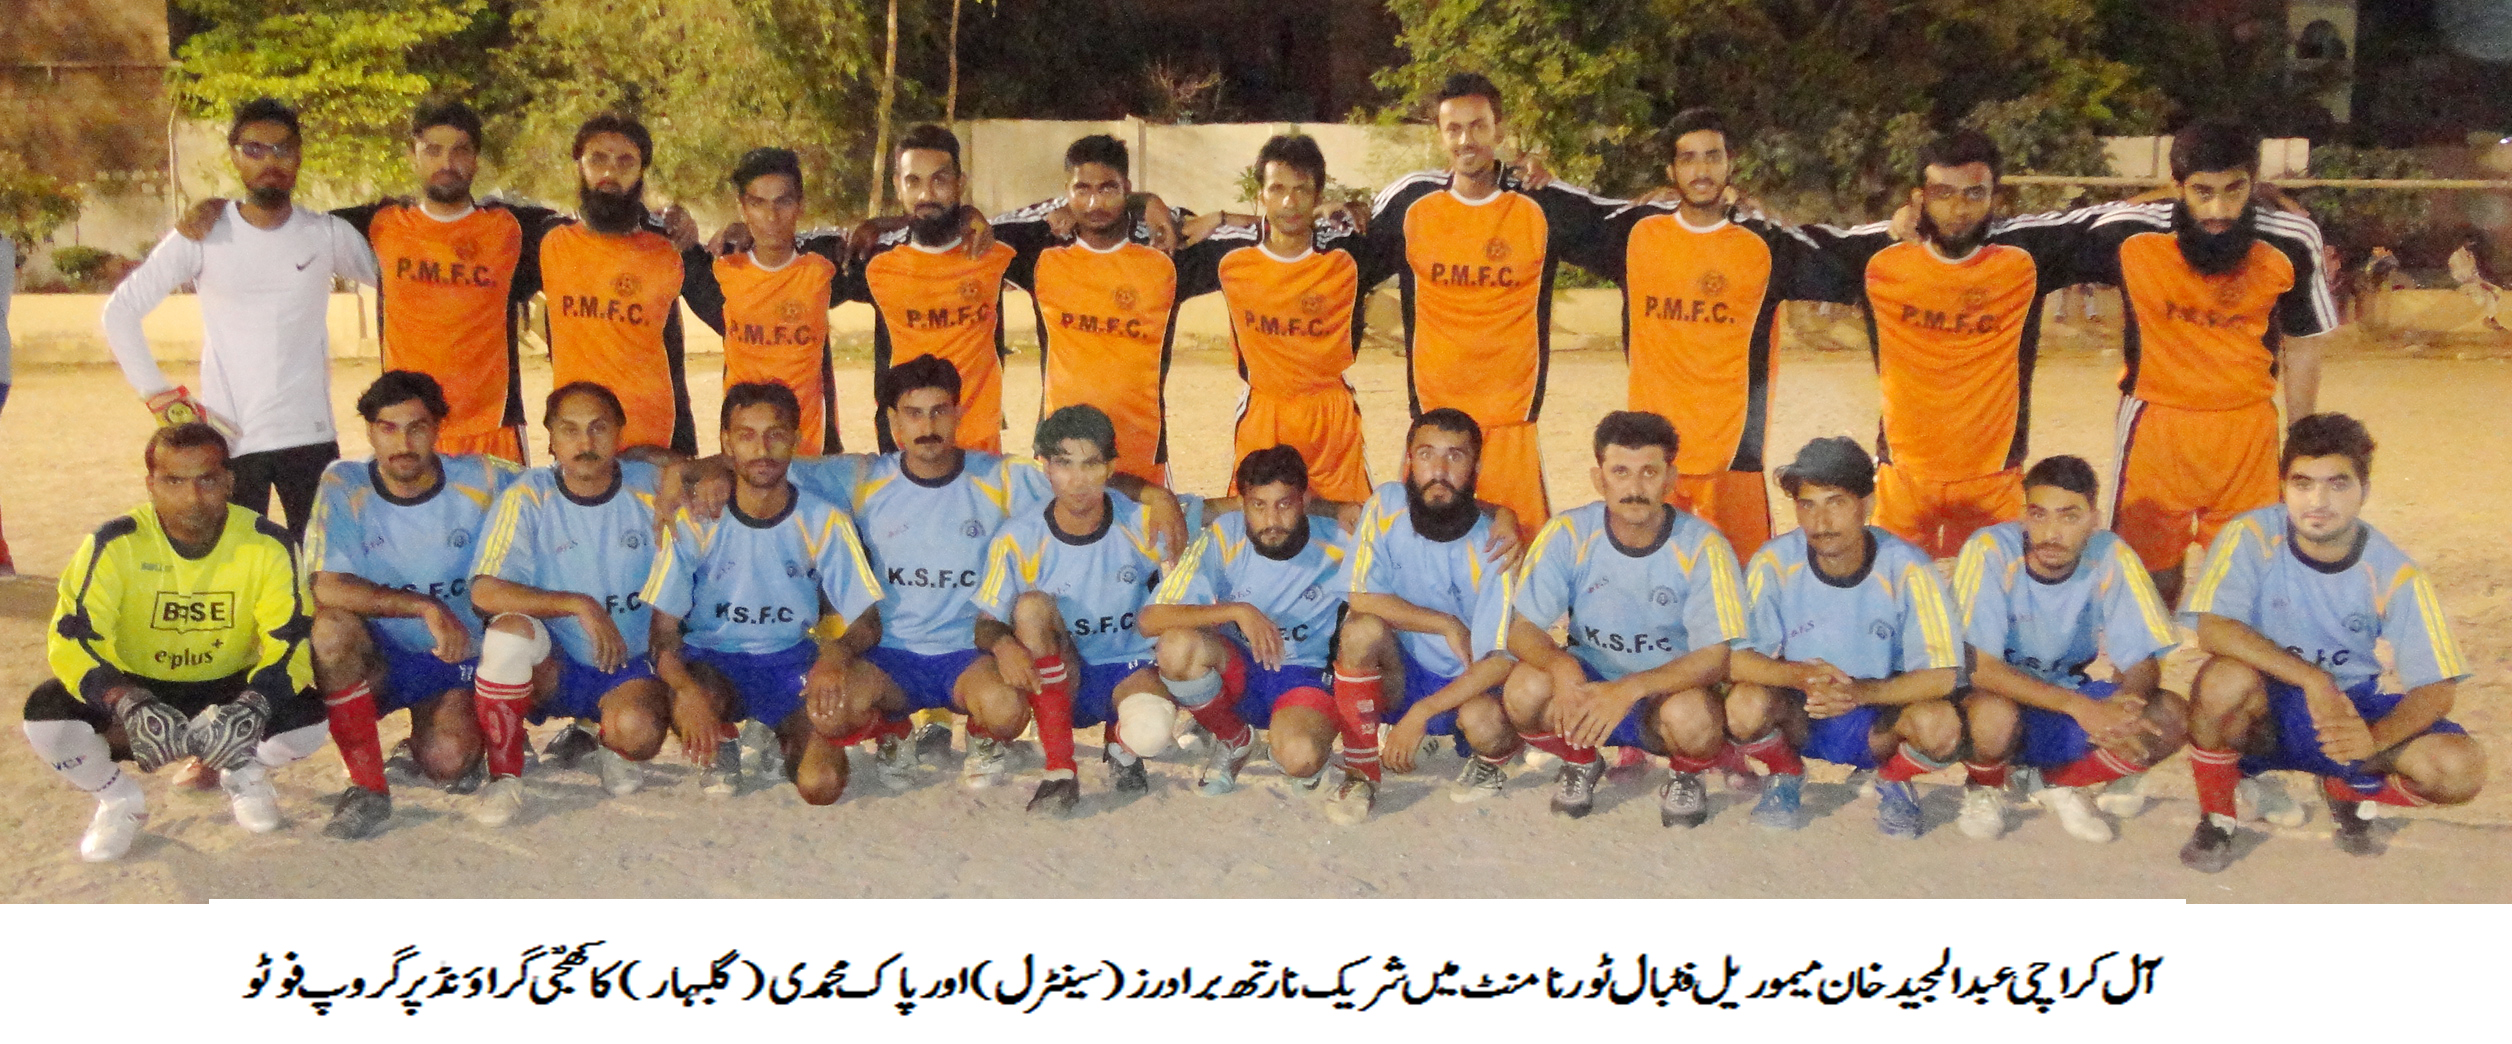 Abdul Majeed Khan Tournament: Karachi Friends, Young Prince and North Brothers secure wins